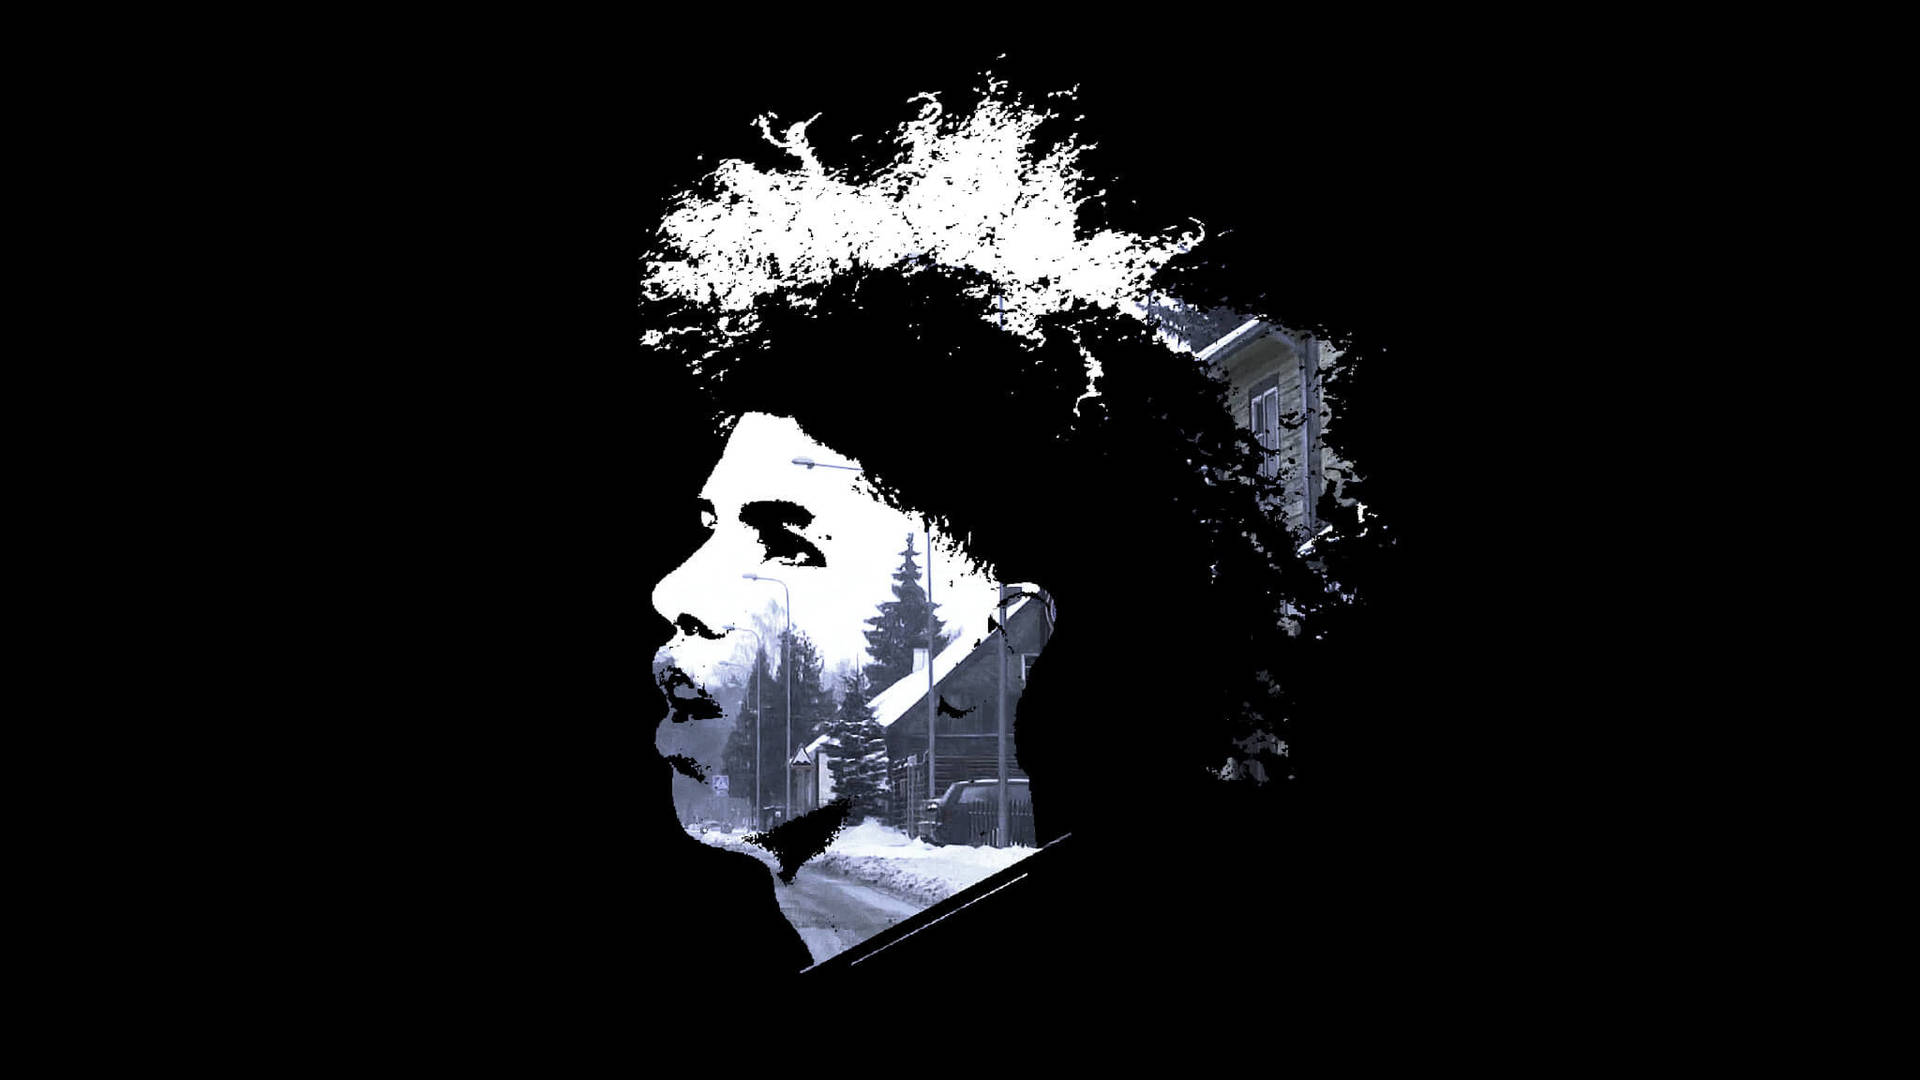 Lamelo Ball In Black And White Wallpaper